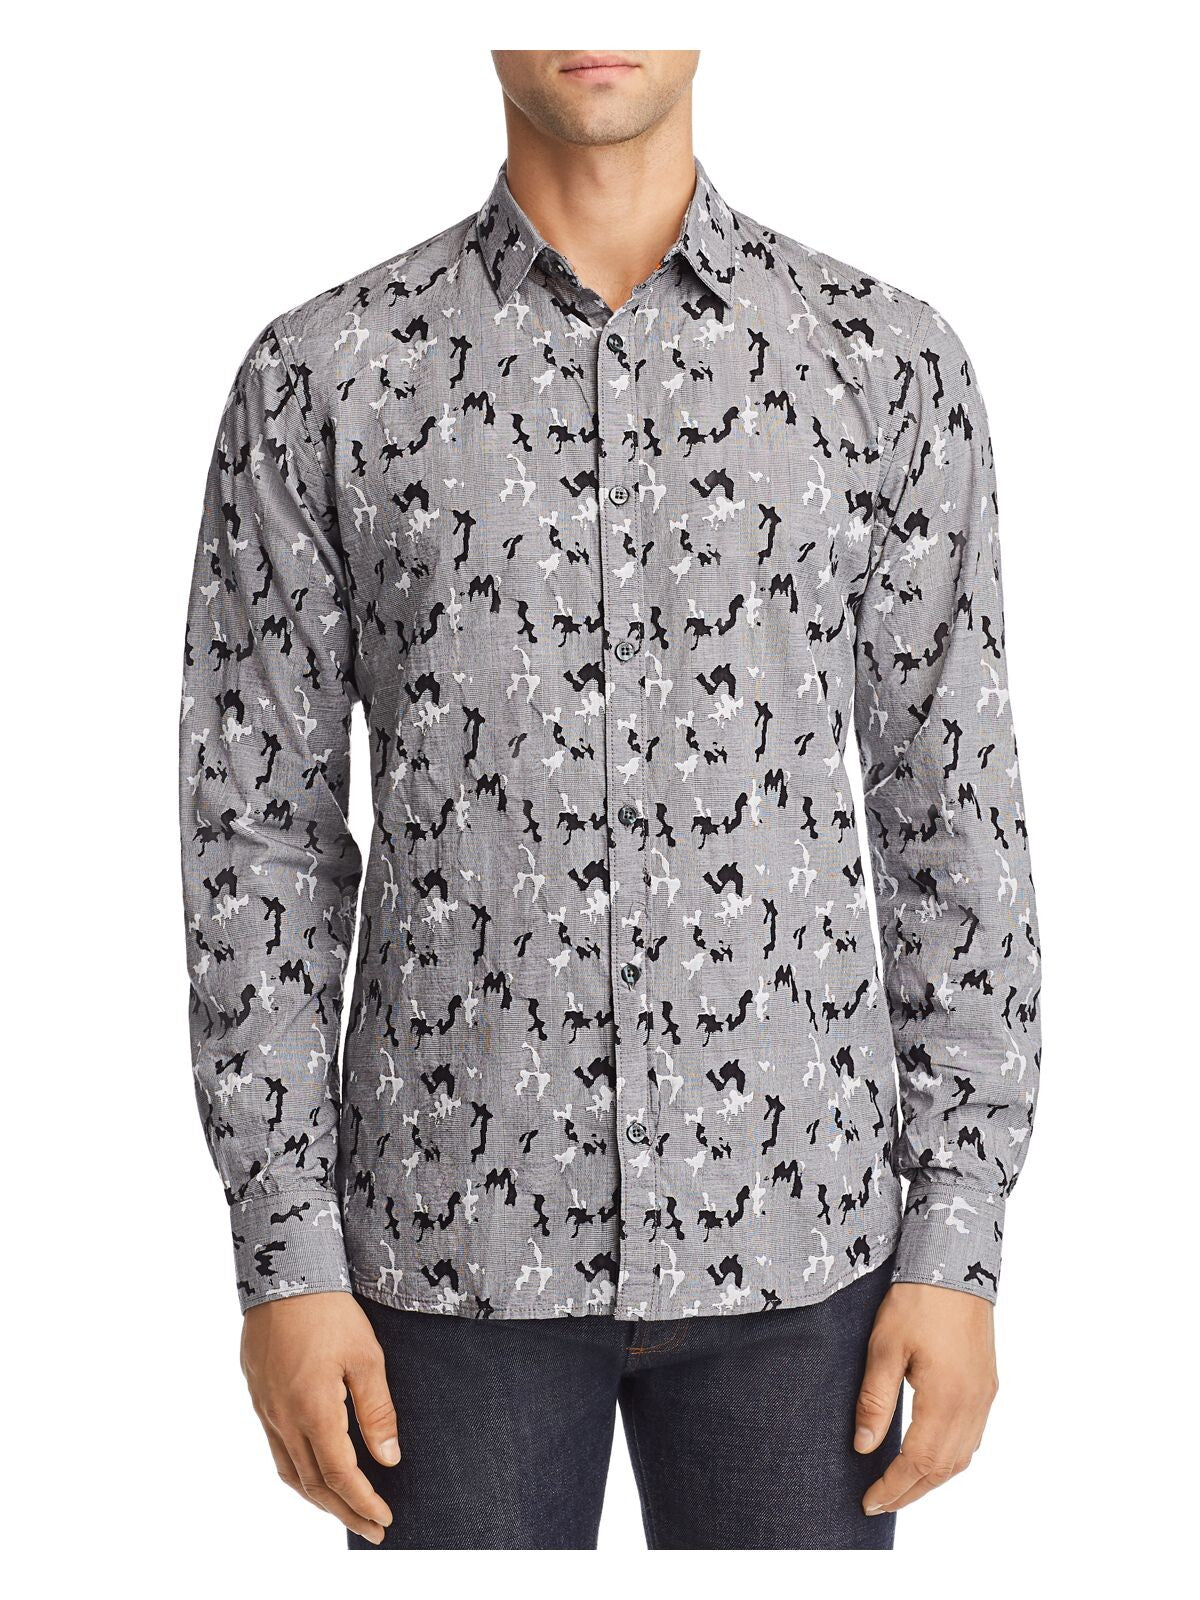 Noize Mens Gray Camouflage Collared Button Down Shirt M